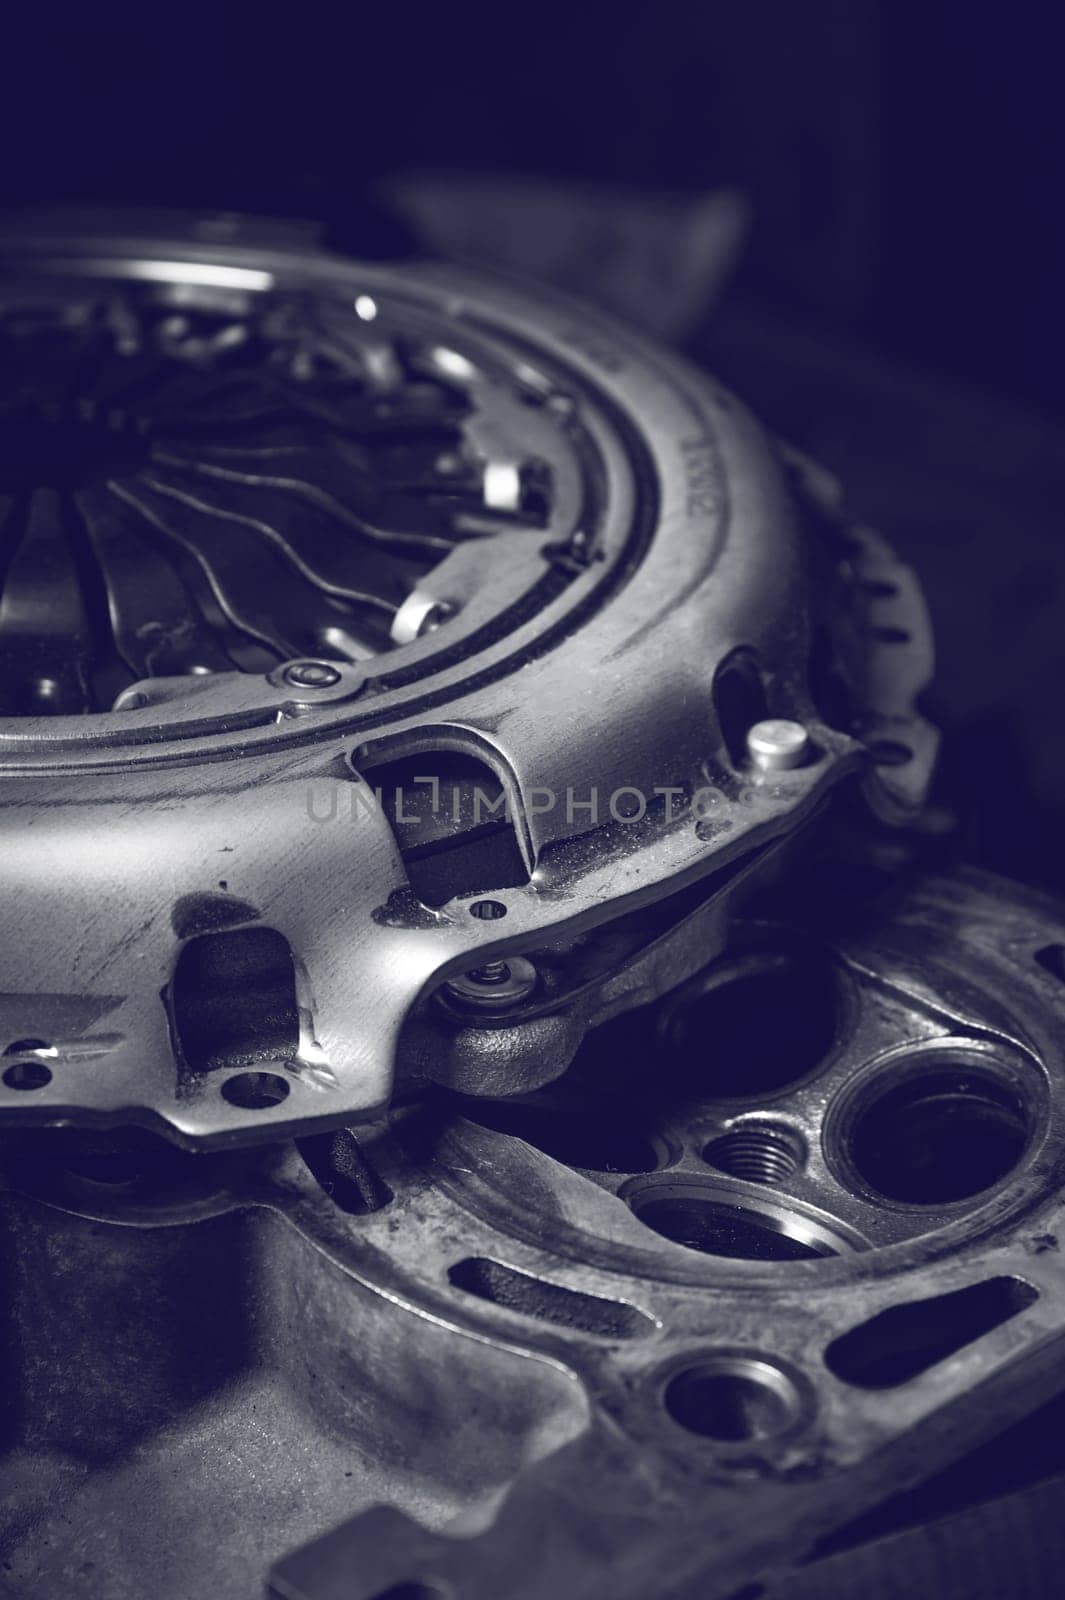 A new clutch basket lies in the workshop on the cylinder head of the internal combustion engine. Toned image.